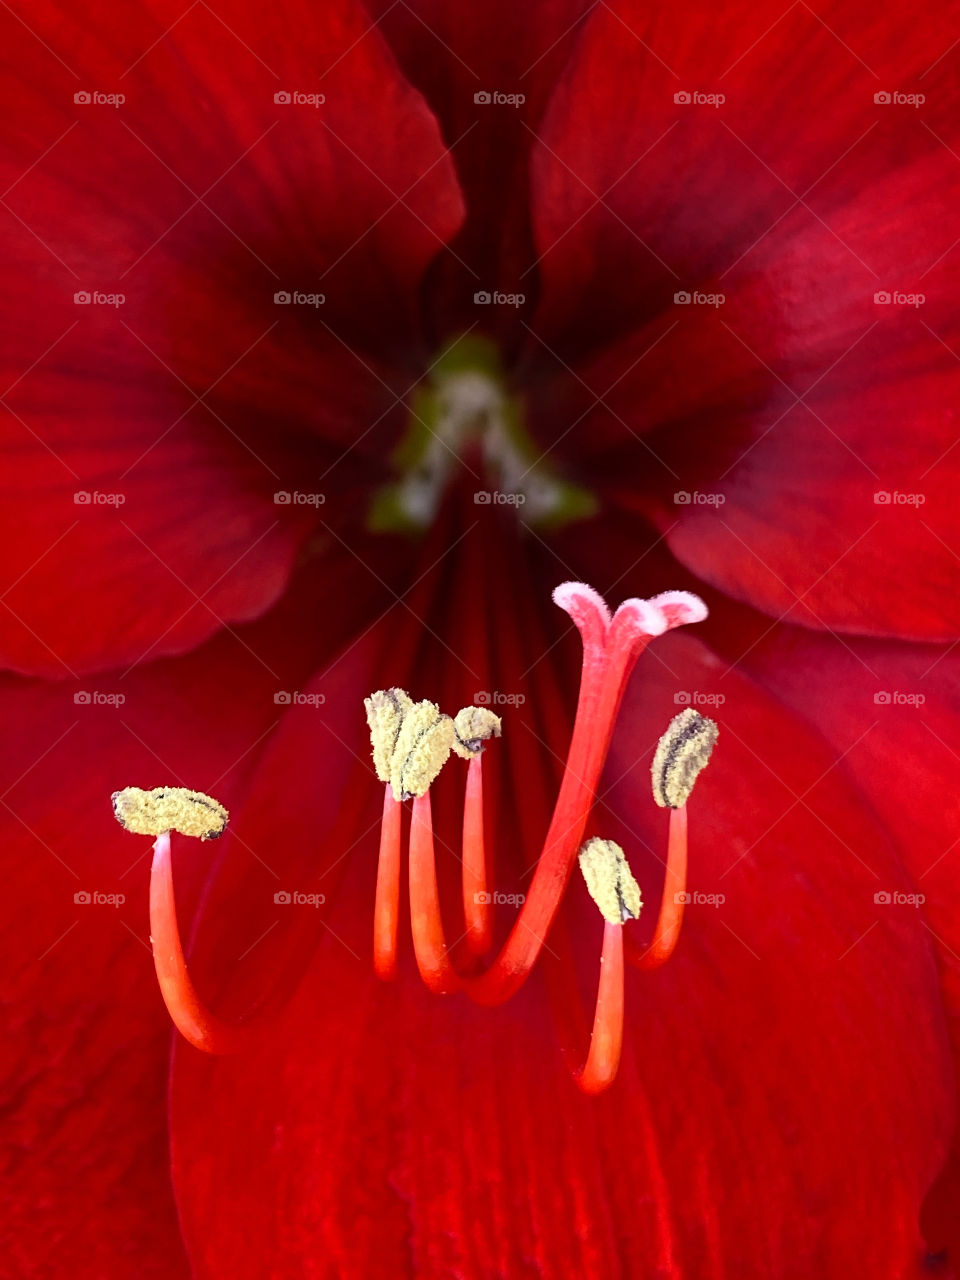 Stamens, anthers and pistil of a red amaryllis flower